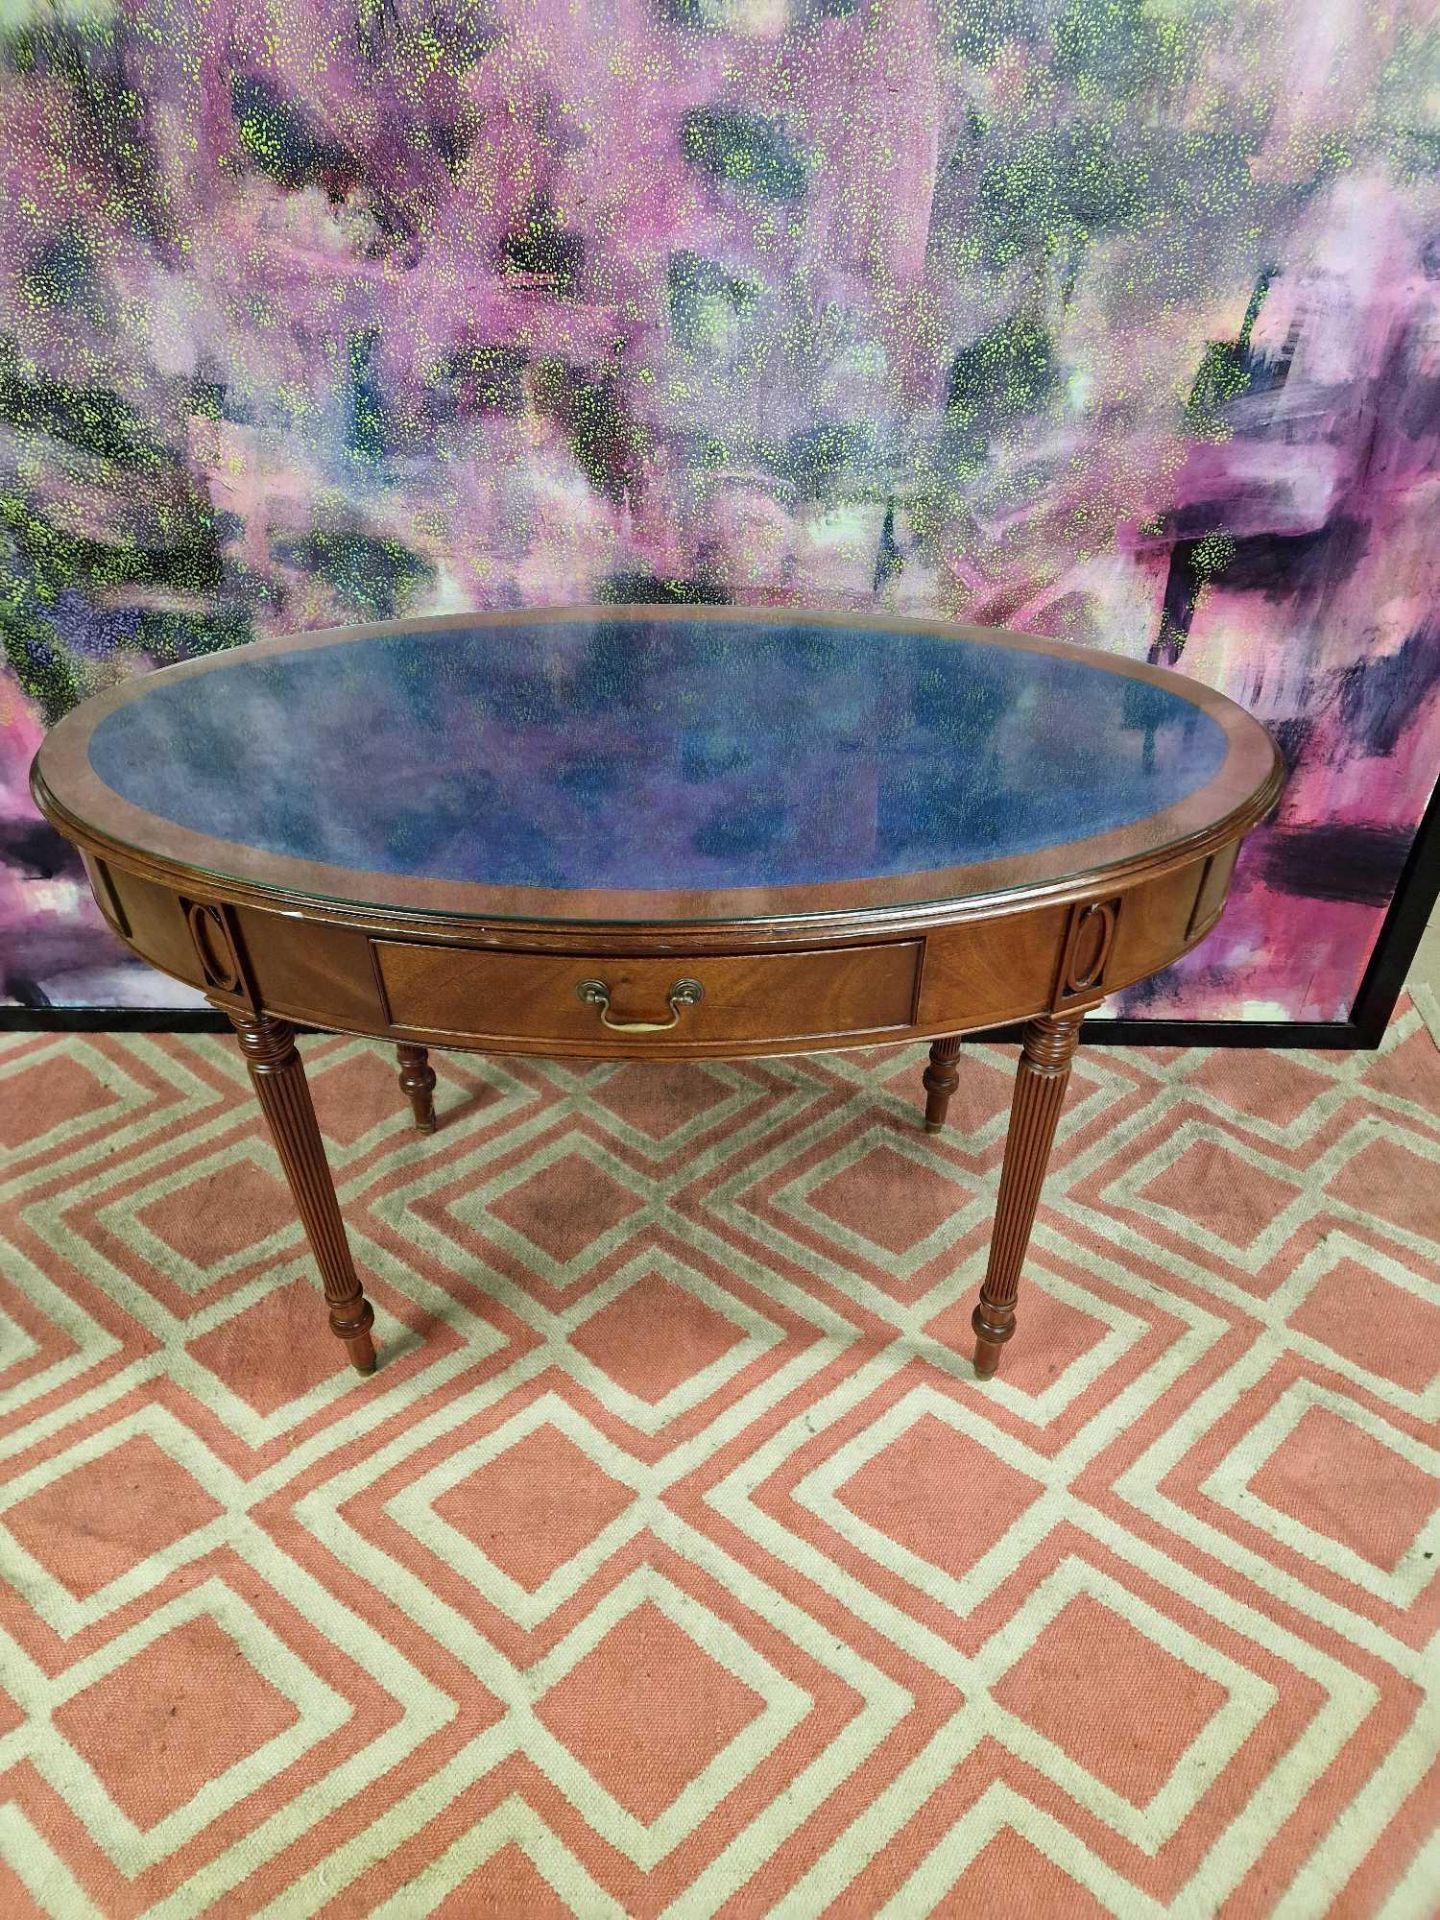 Oval writing table with blue tooled leather inlay under a protective glass top, the apron features